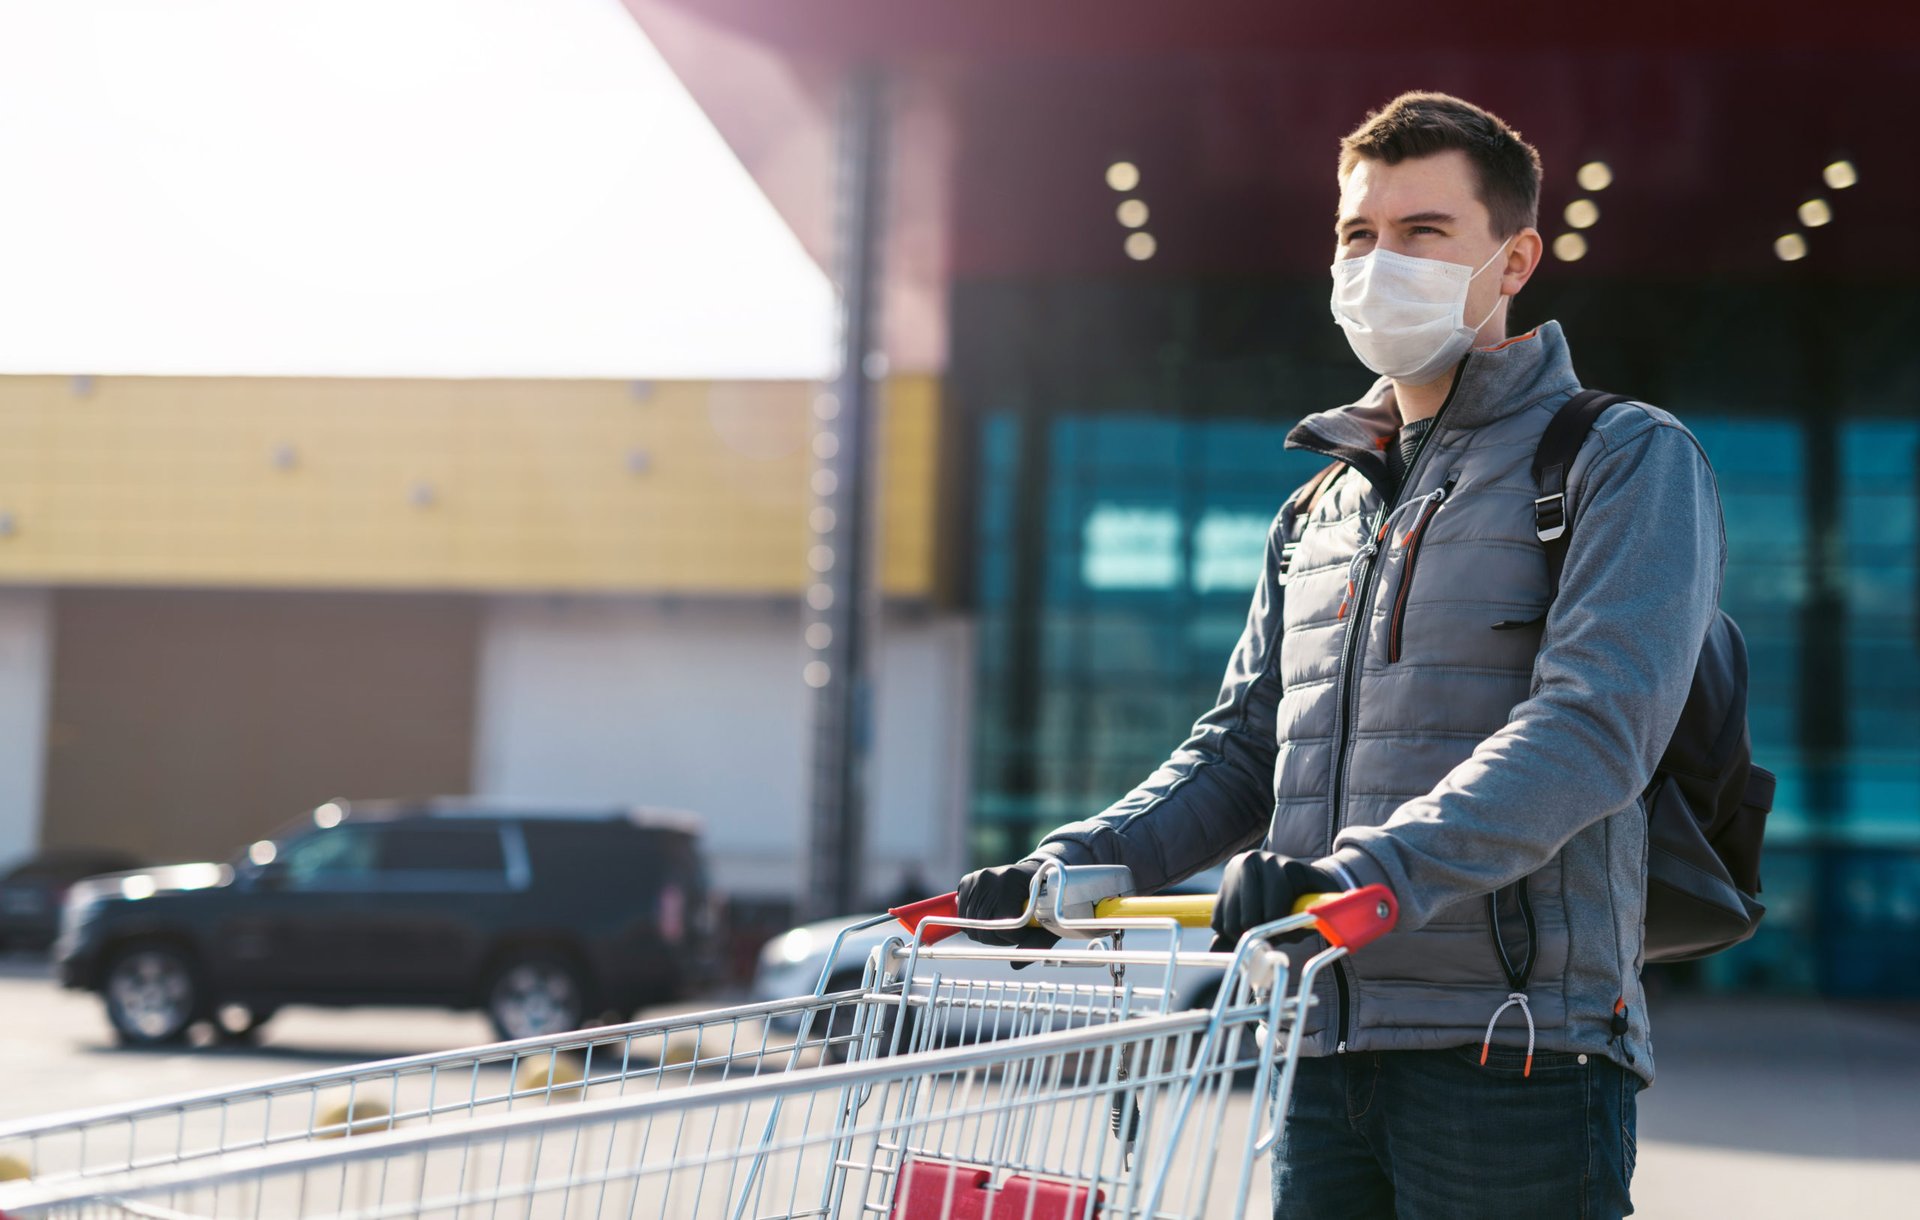 A shopper in a mask pushes a cart outside a store